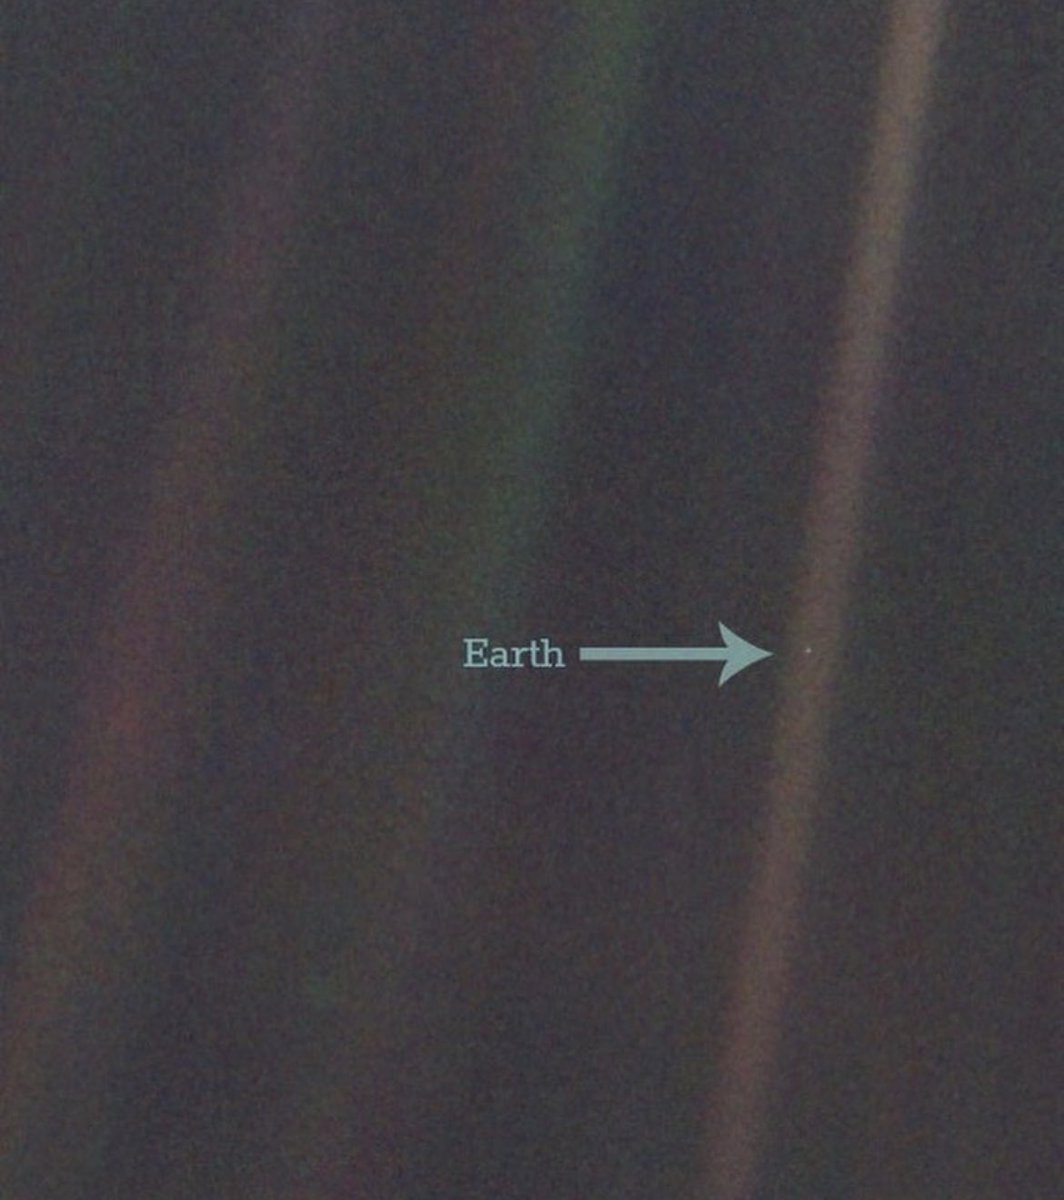 The Pale Blue Dot is an iconic photograph of Earth captured by the Voyager 1 space probe in 1990. Taken from a distance of around 6 billion kilometers (3.7 billion miles) as Voyager 1 was departing our solar system, the image portrays Earth as a tiny, pale blue speck in the…